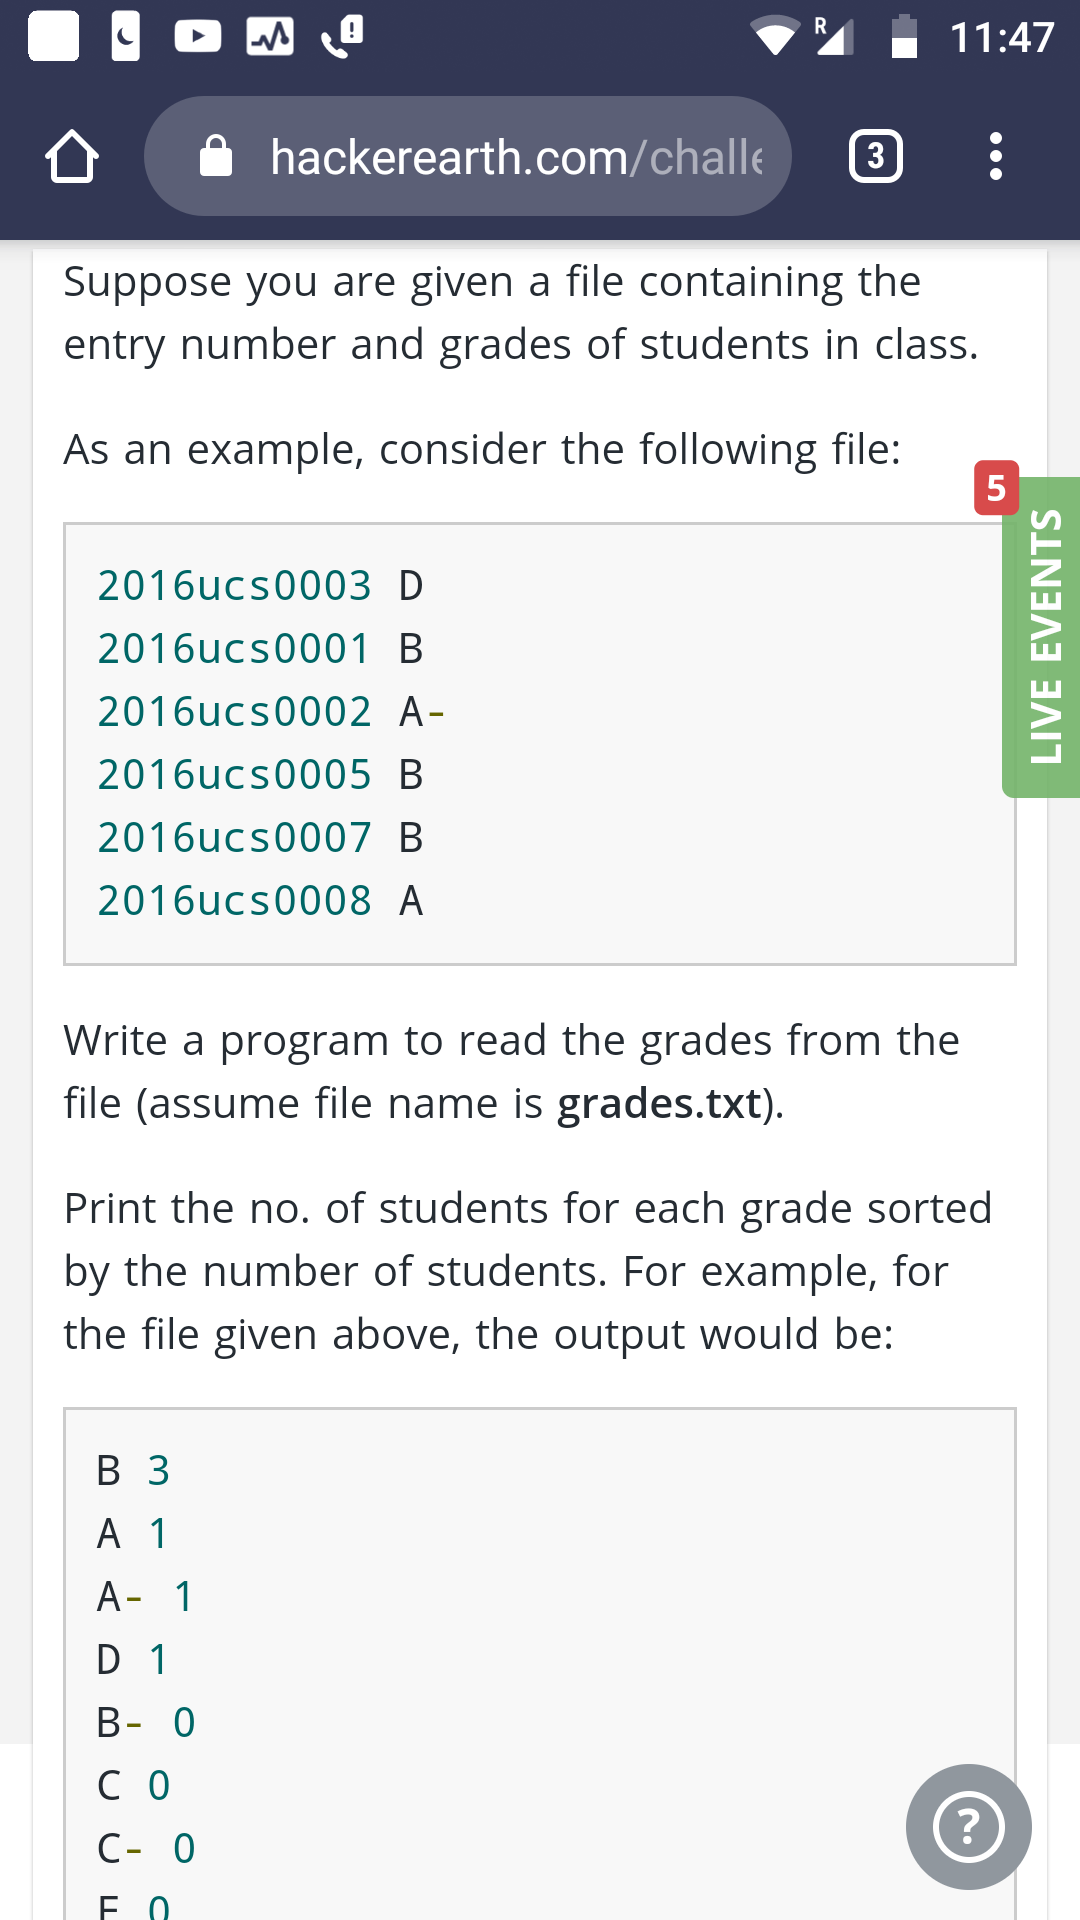 R
11:47
hackerearth.com/challe
3
Suppose you are given a file containing the
entry number and grades of students in class.
As an example, consider the following file:
5
2016ucs0003 D
2016ucs0001 B
2016ucs0002 A-
2016ucs0005 B
2016ucs0007 B
2016ucs0008 A
Write a program to read the grades from the
file (assume file name is grades.txt)
Print the no. of students for each grade sorted
by the number of students. For example, for
the file given above, the output would be:
В З
А 1
A- 1
D 1
В- 0
со
?
C- 0
F 0
LIVE EVENTS
